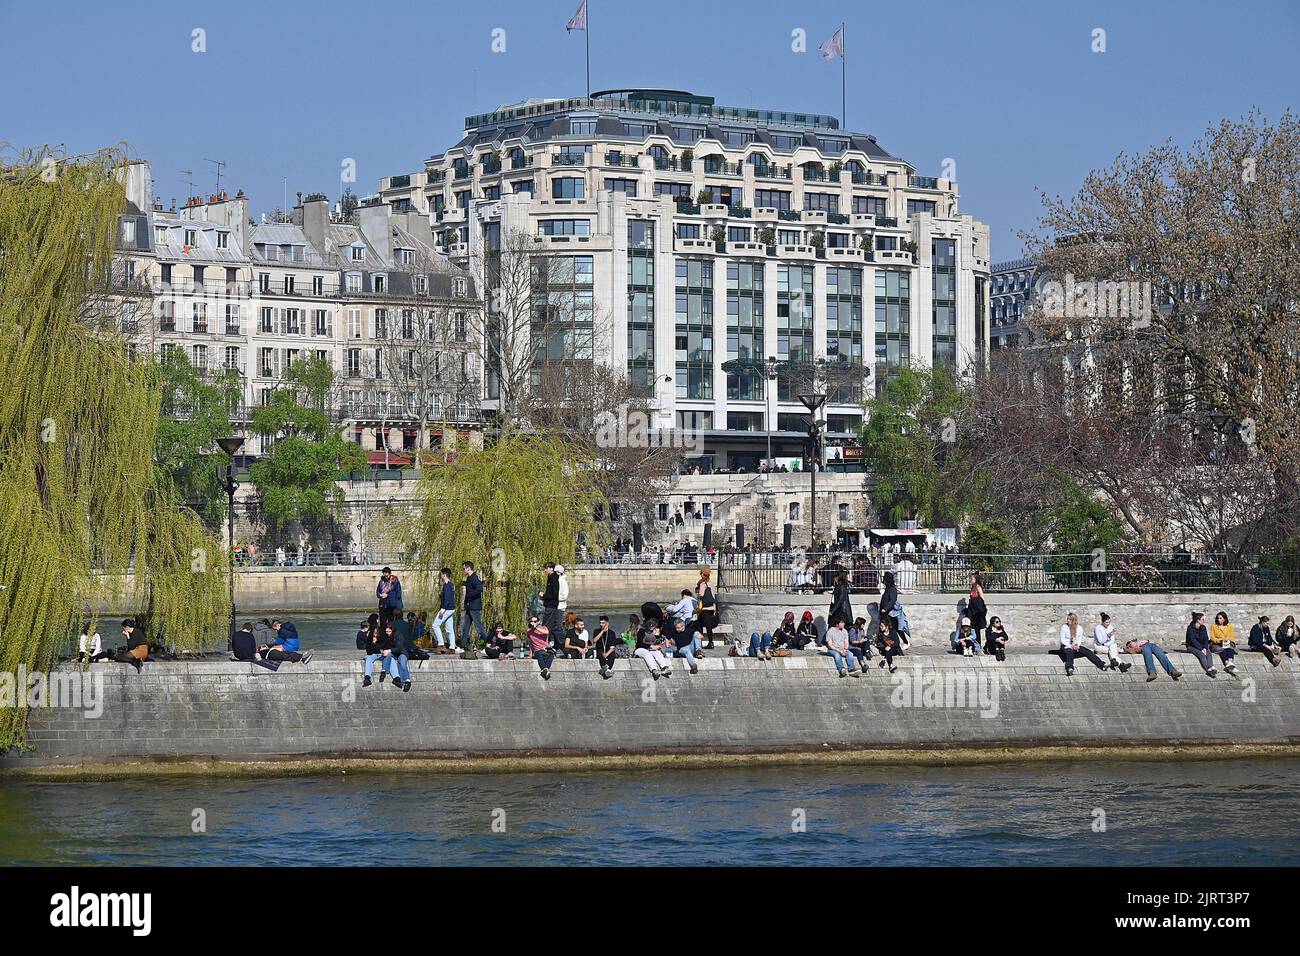 Paris (France): renovated building of La Samaritaine department store in the 1st arrondissement (district) by the River Seine, a masterpiece of Art No Stock Photo